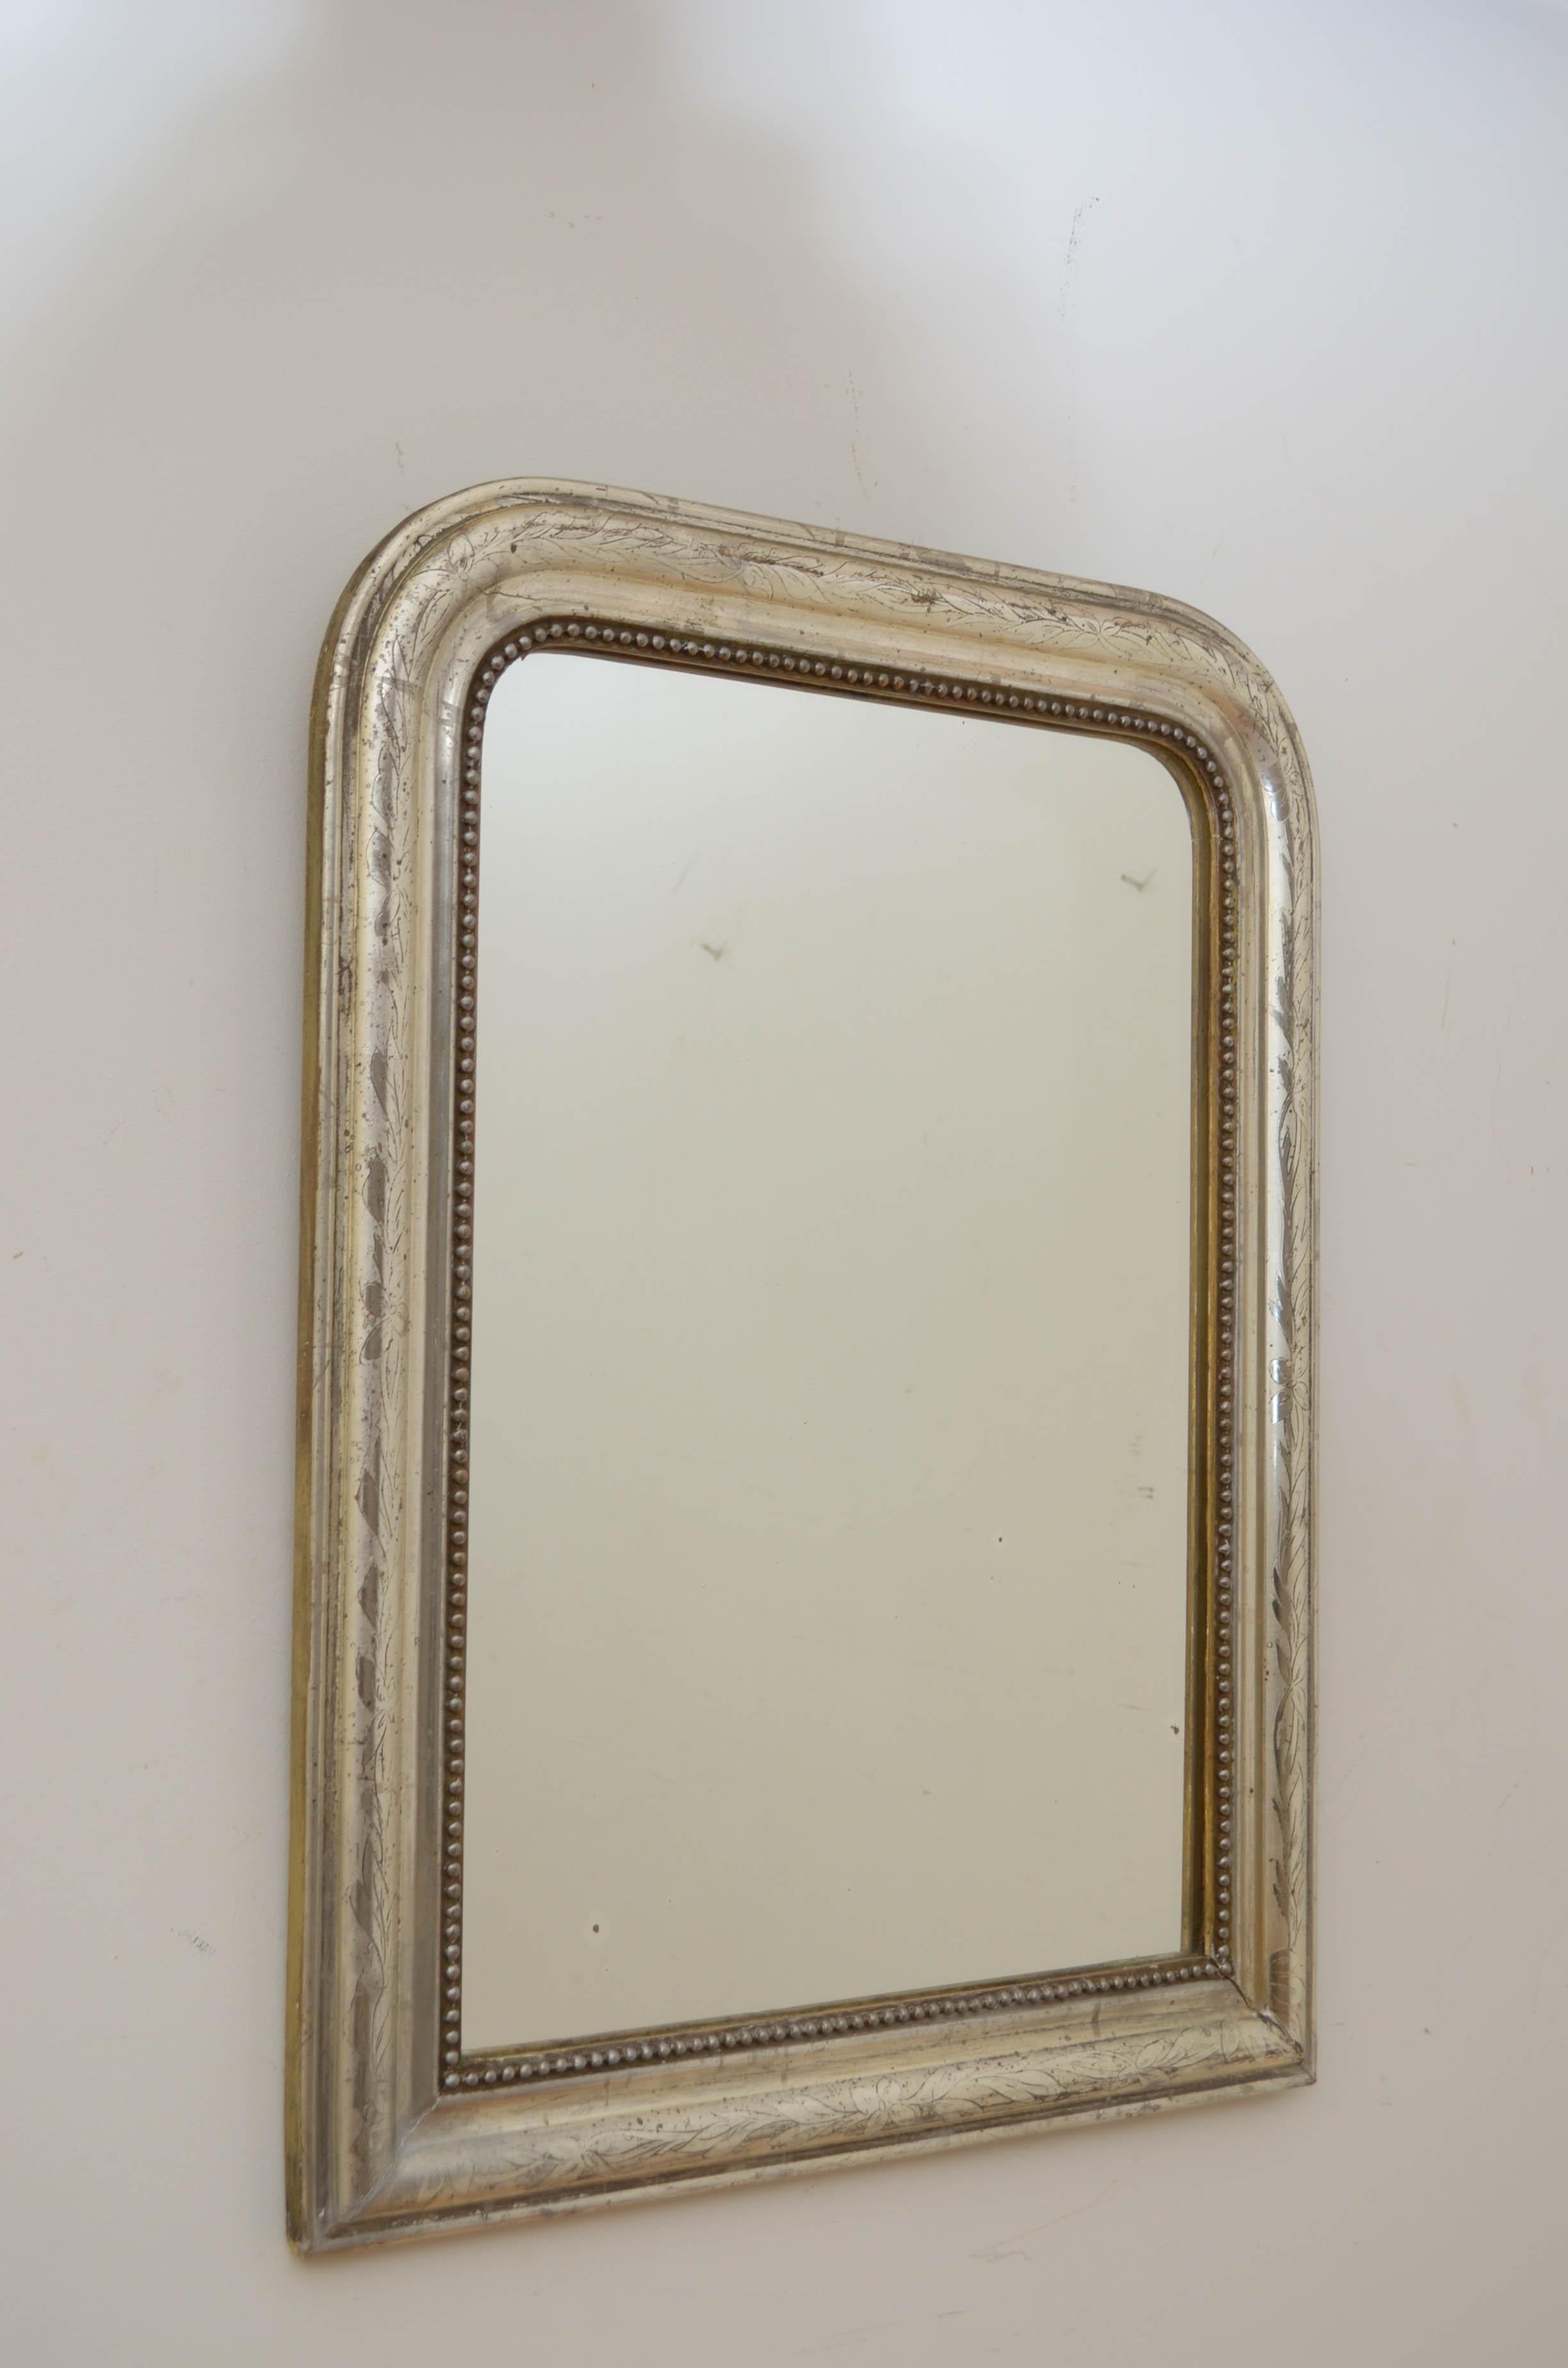 K0555 Beautiful 19th century silver gilded wall mirror, having original foxed glass in beaded, moulded and silver gilded frame with leaf motifs throughout. This antique mirror retains its original glass, original gilding and original backboard, all